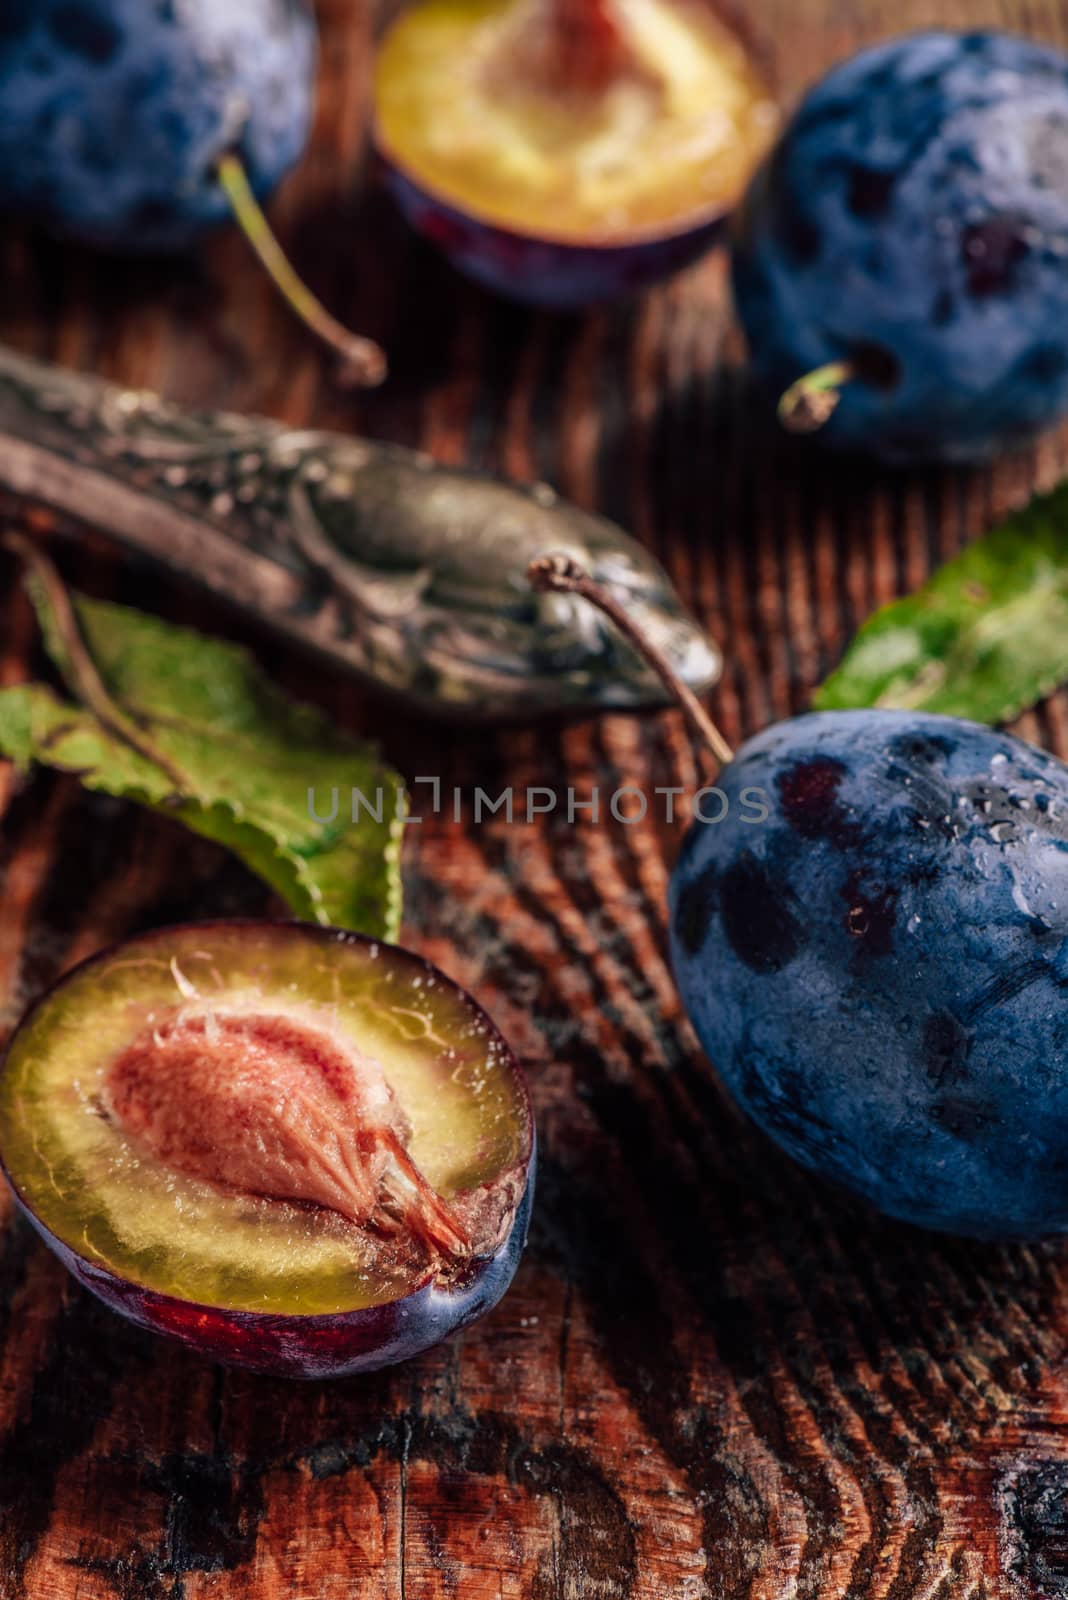 Ripe plums with leaves, water drops and knife by Seva_blsv